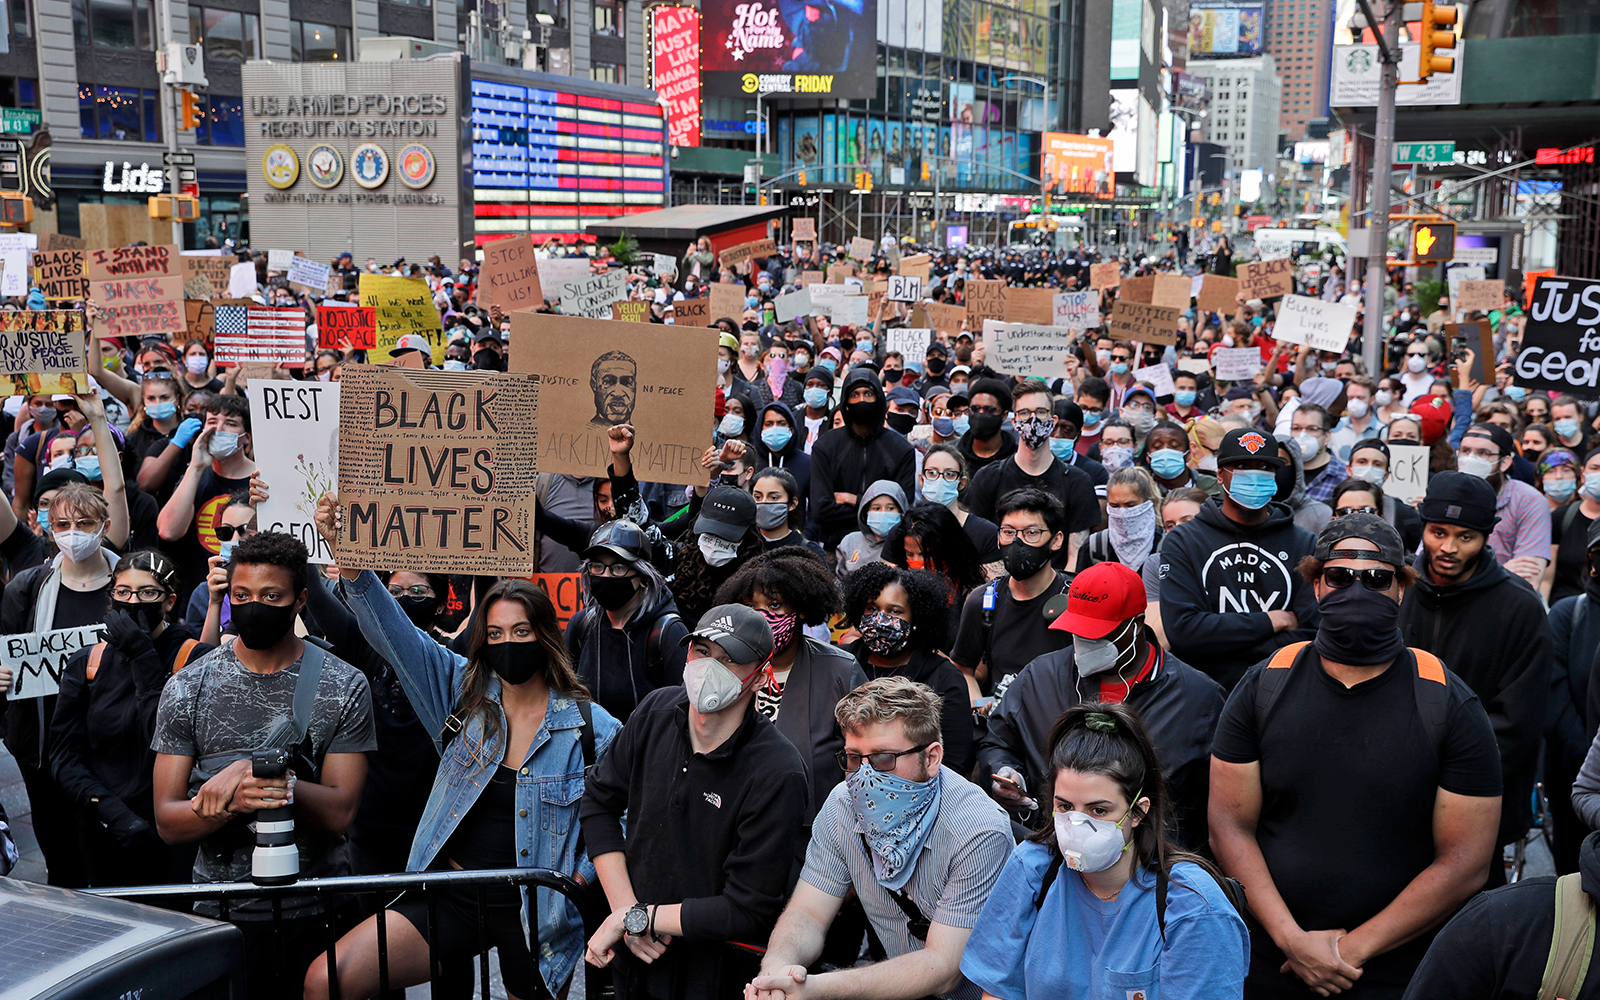 New York City imposes 11 p.m. curfew amid Floyd protests The Times of